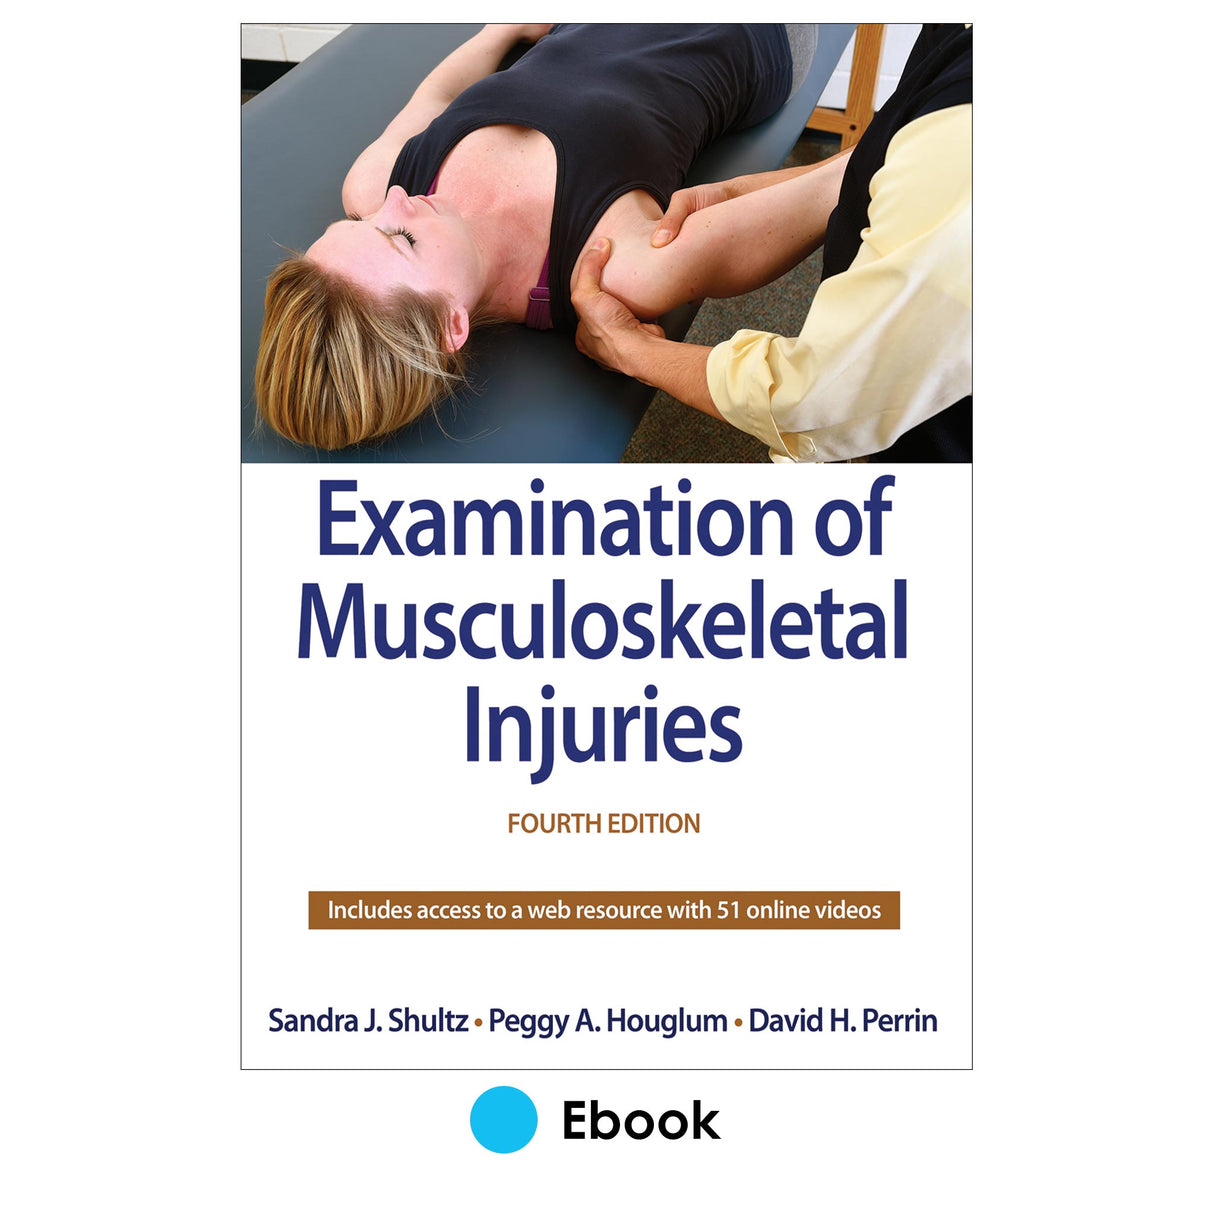 Examination of Musculoskeletal Injuries 4th Edition PDF With Web Resource